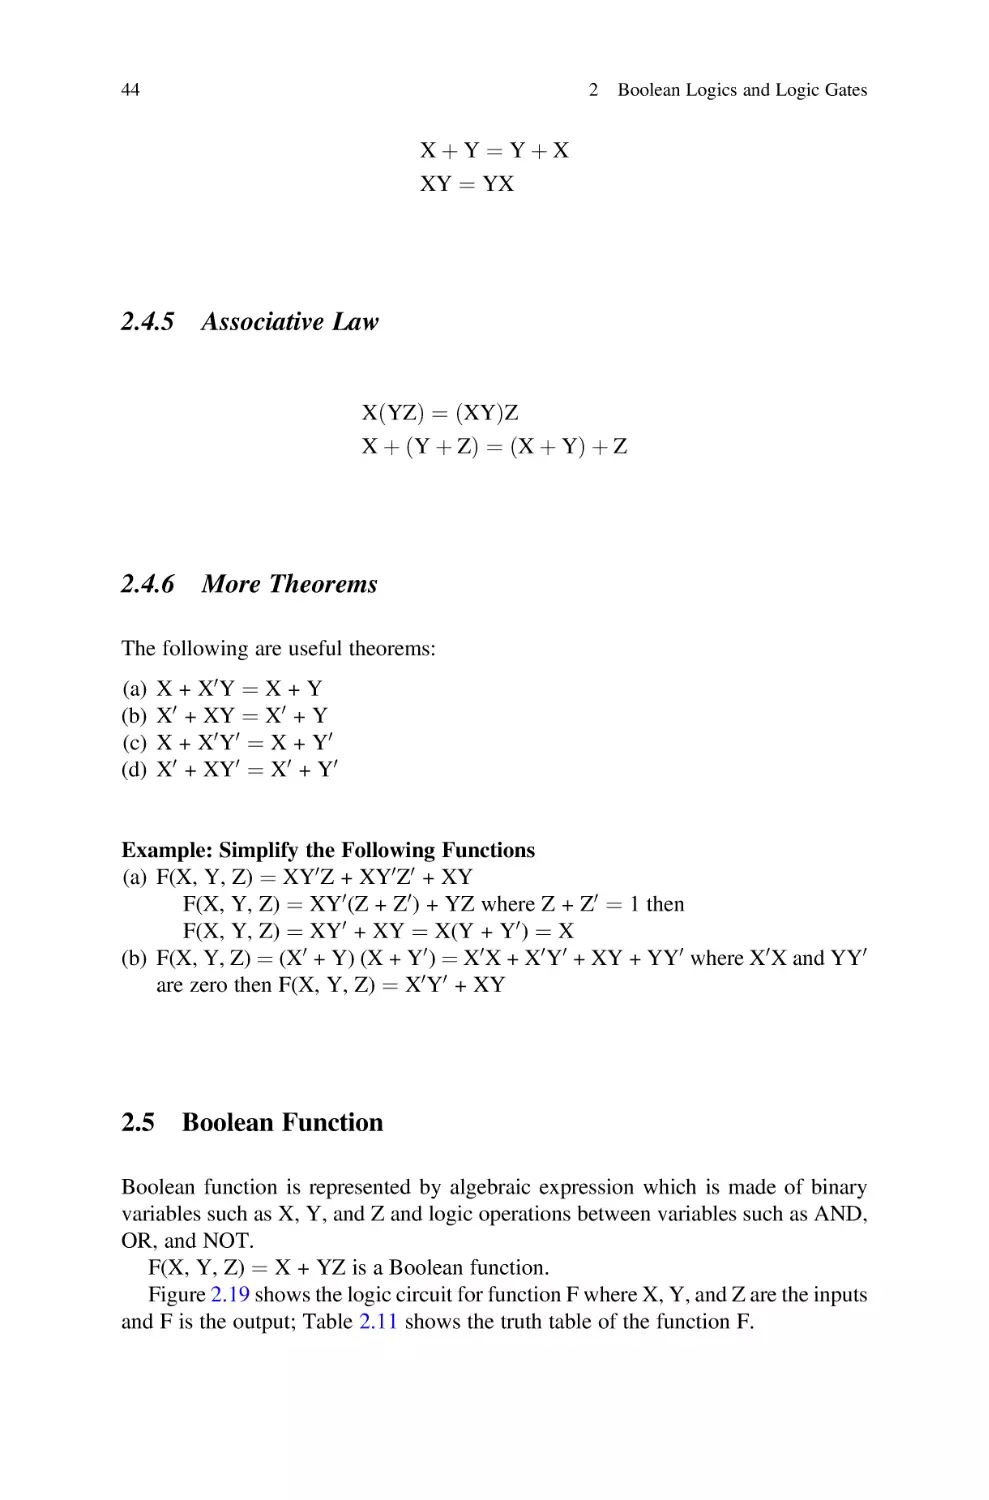 2.4.5 Associative Law
2.4.6 More Theorems
2.5 Boolean Function